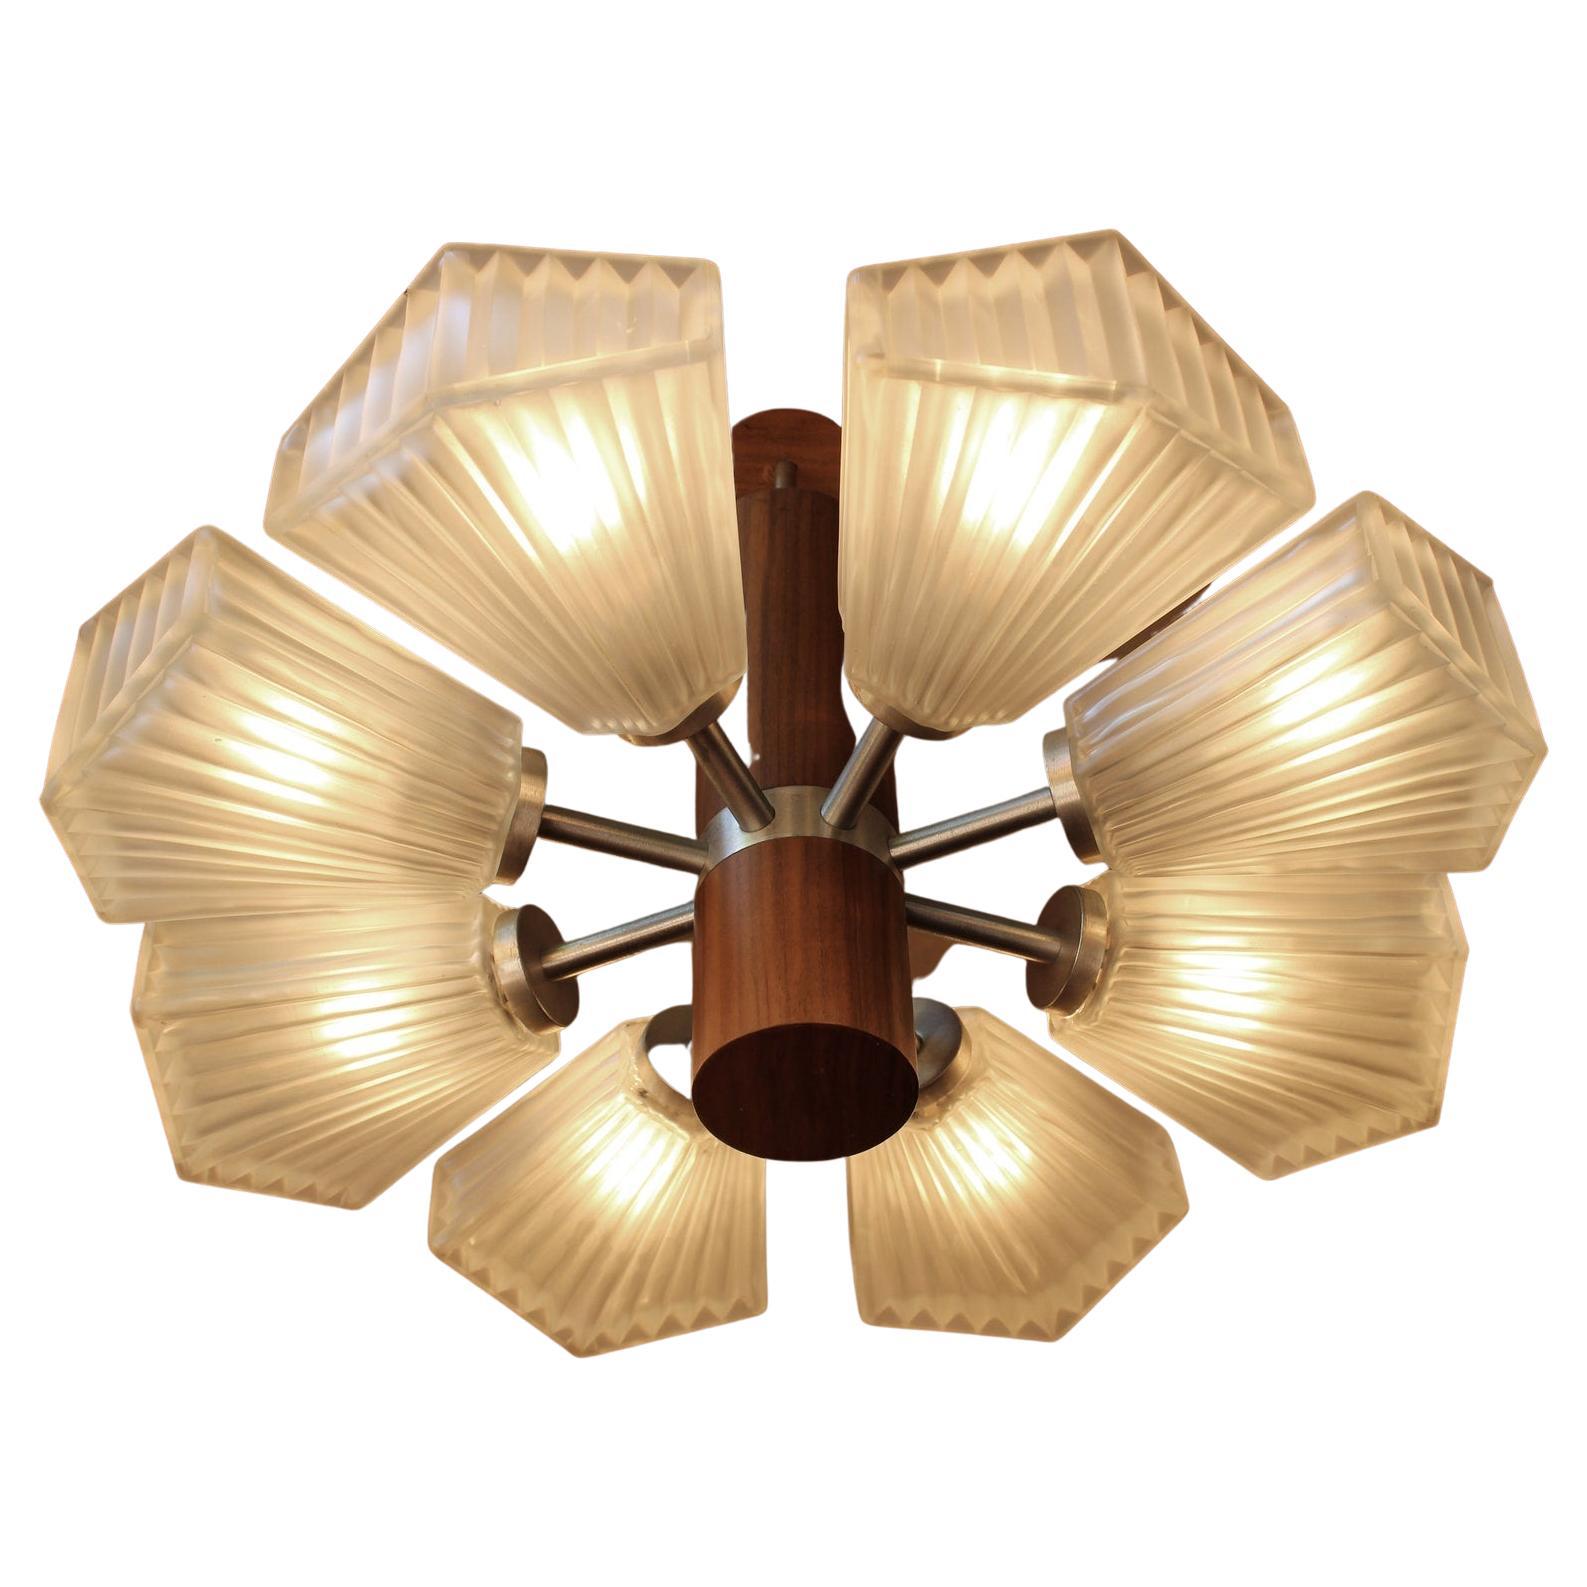 TEMDE MINIMALISTIC TEAK & MOULDED GLASS CHANDELIER WITH 8 LIGHTS (+ 1 SHADE FOR RESERVE), GERMANY 1960s

DIAMETER 21